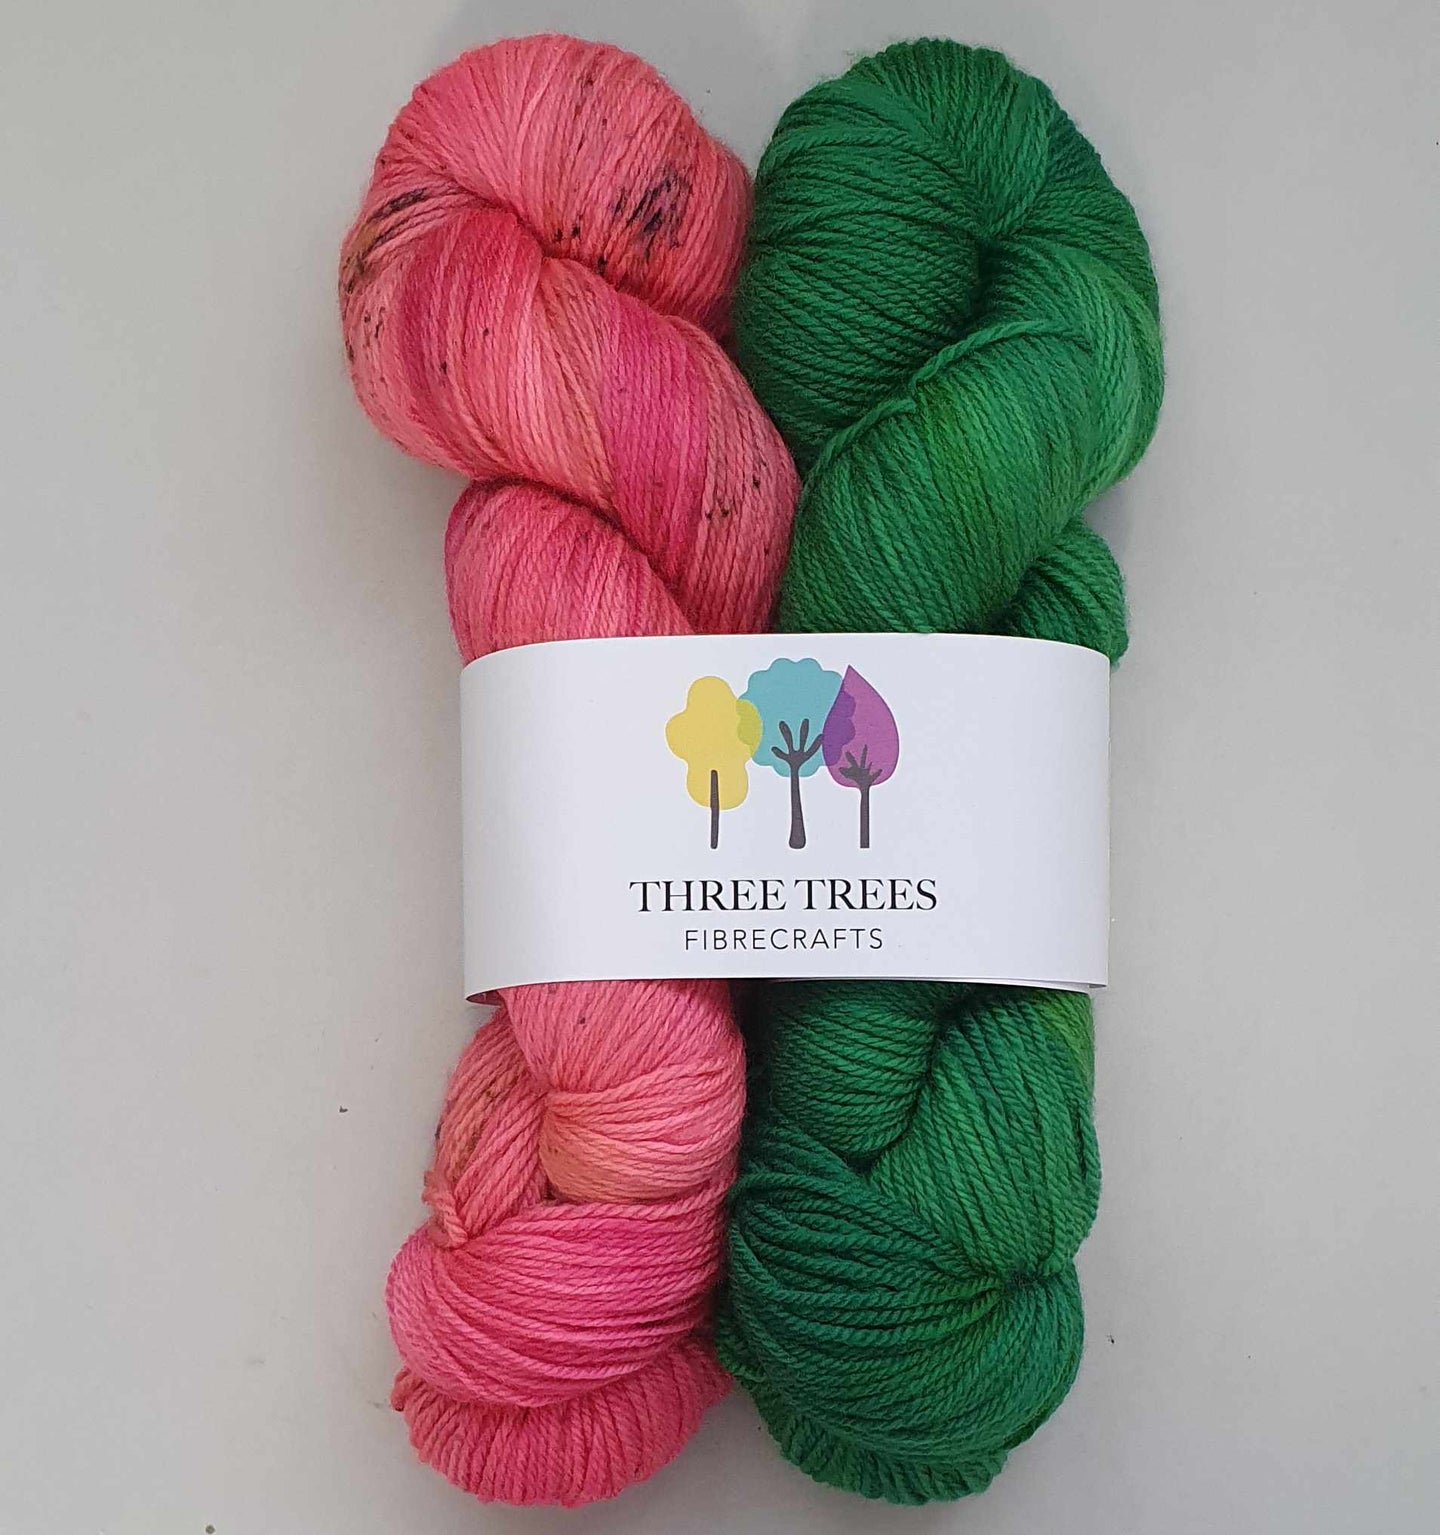 Perfect Pairing - Will Cut Grass for Rupees/Link Pink (Fledgling 4ply Sock)